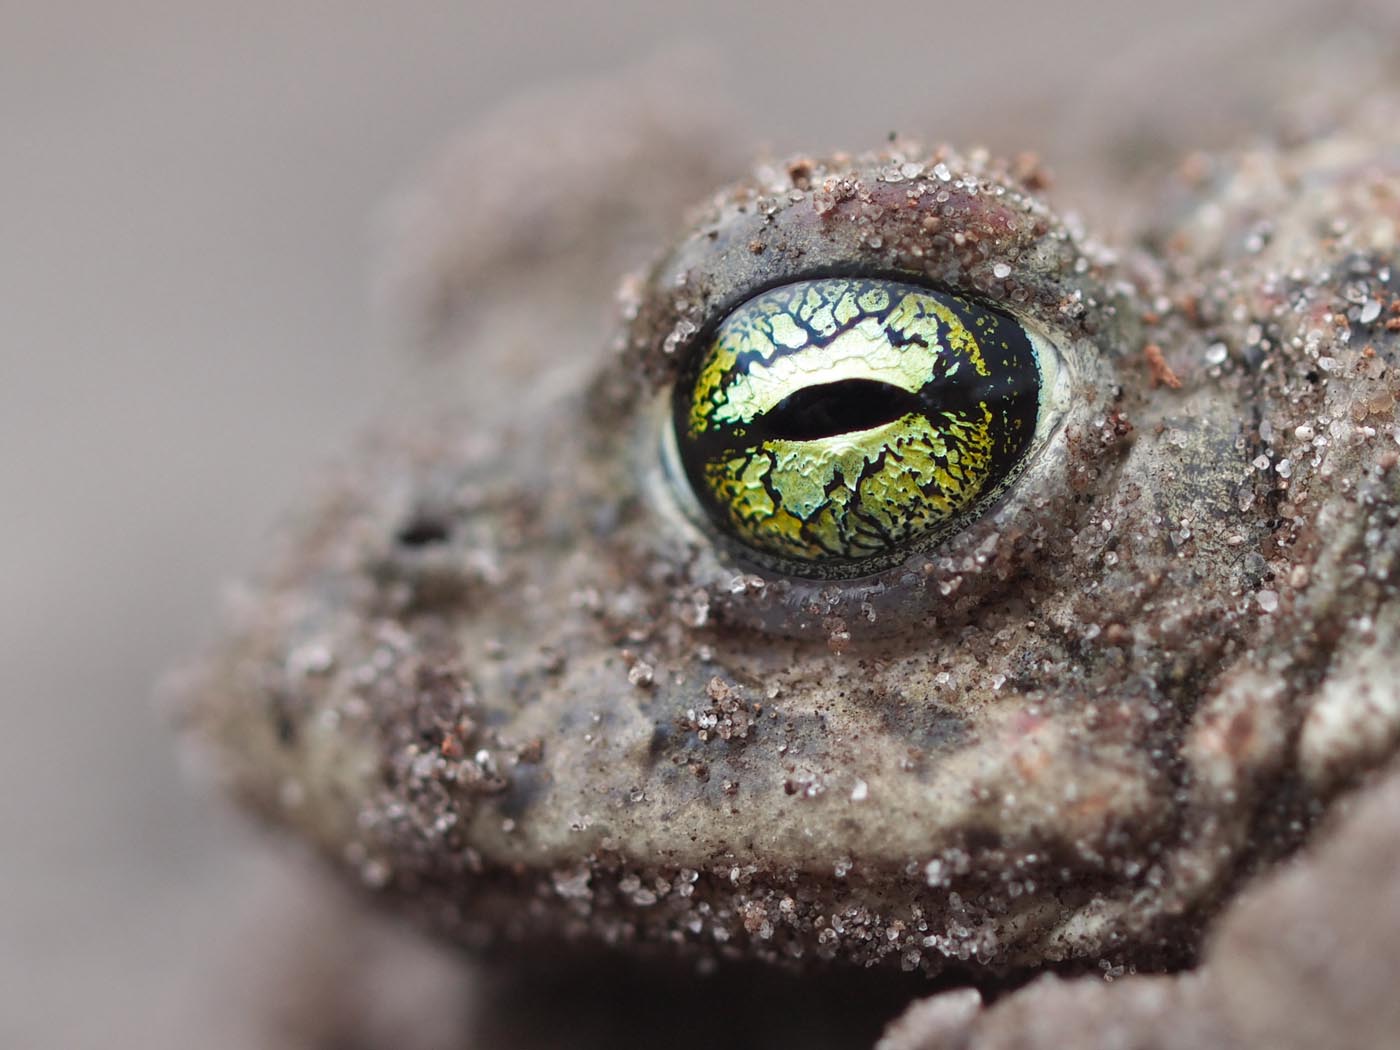 yellow eyes of a Natterjack toad